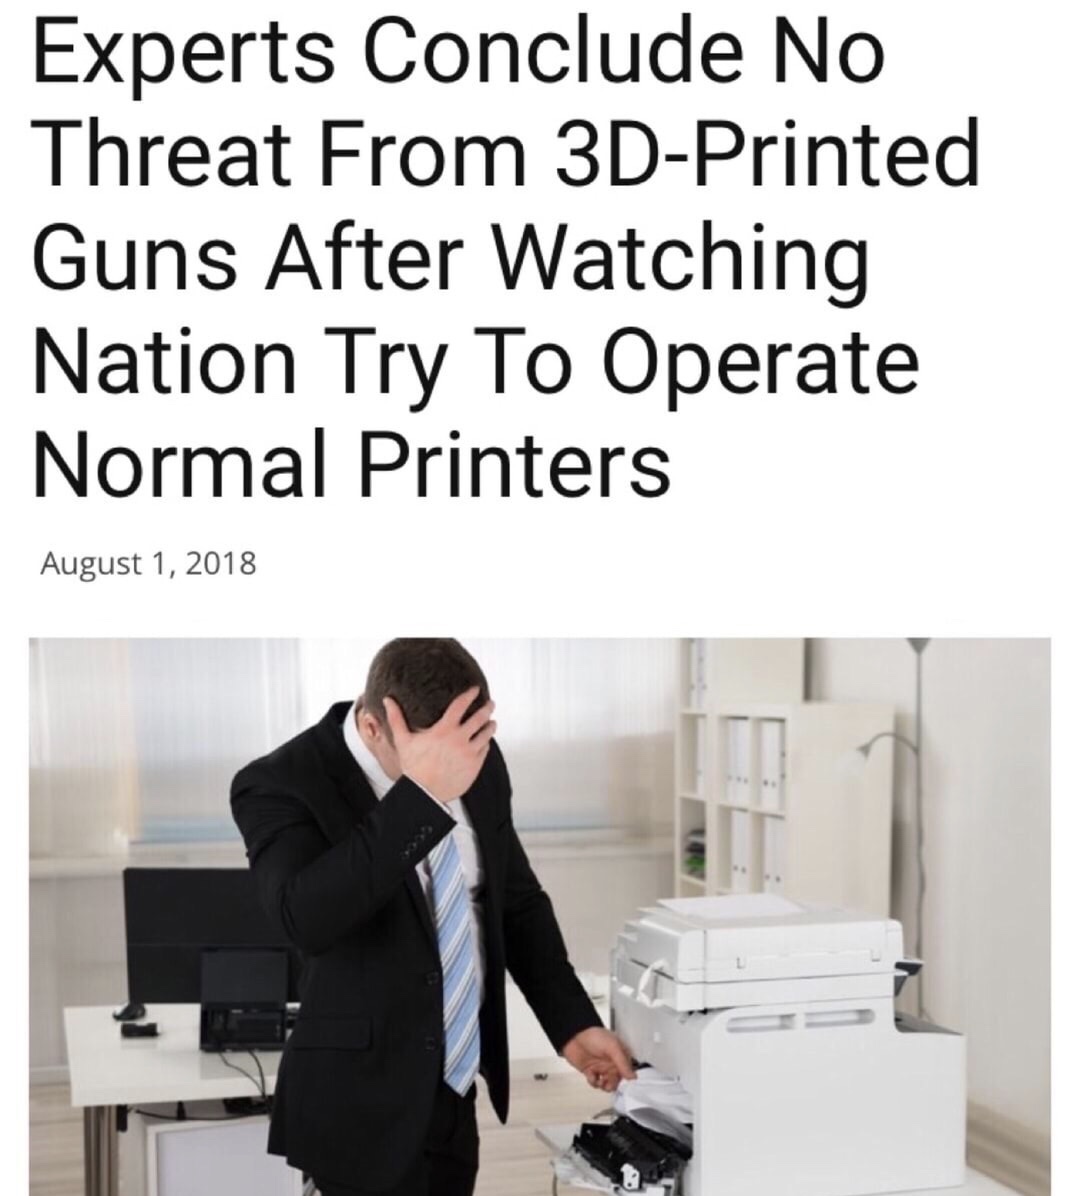 memes - explore learning - Experts Conclude No Threat From 3DPrinted Guns After Watching Nation Try To Operate Normal Printers